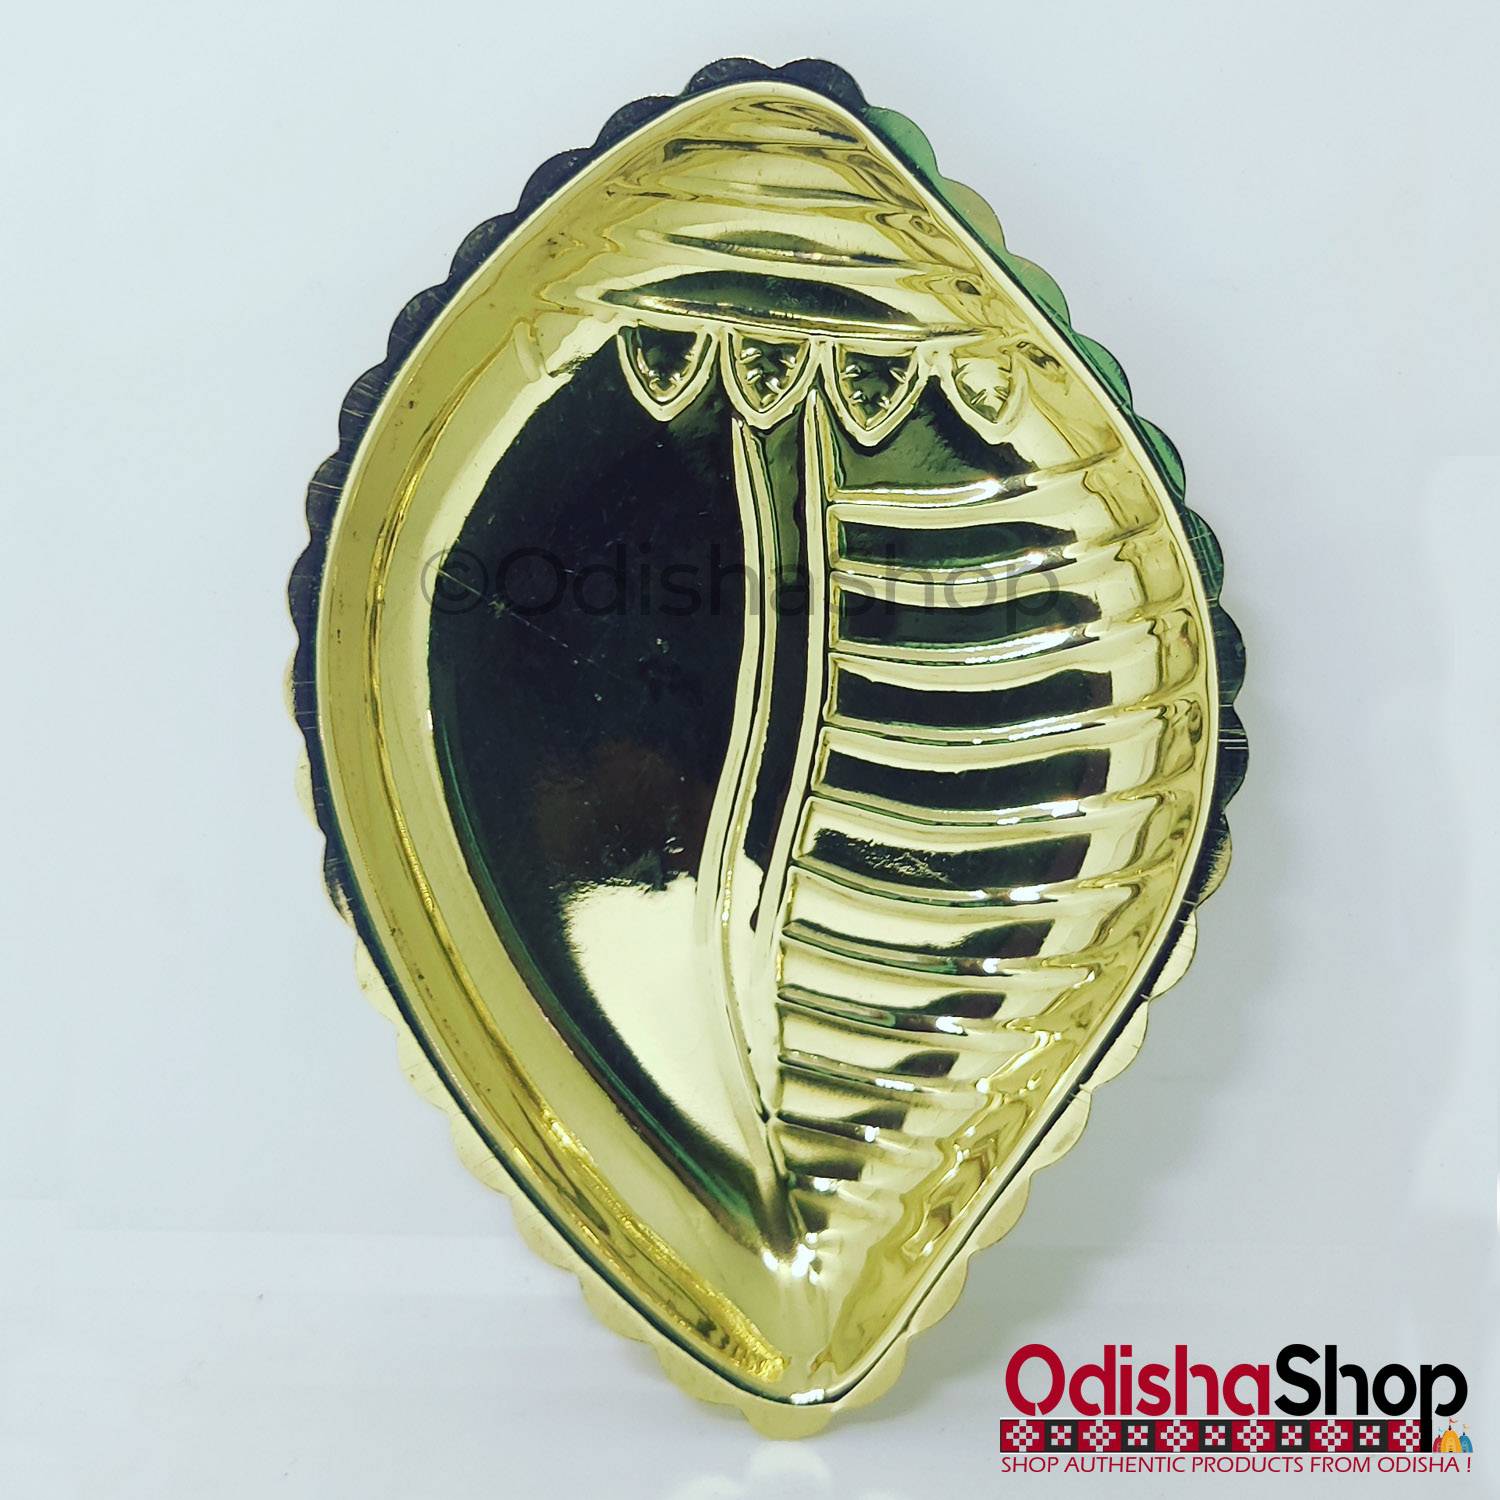 Sankha Design Brass Plate For Puja From OdishaShop Side